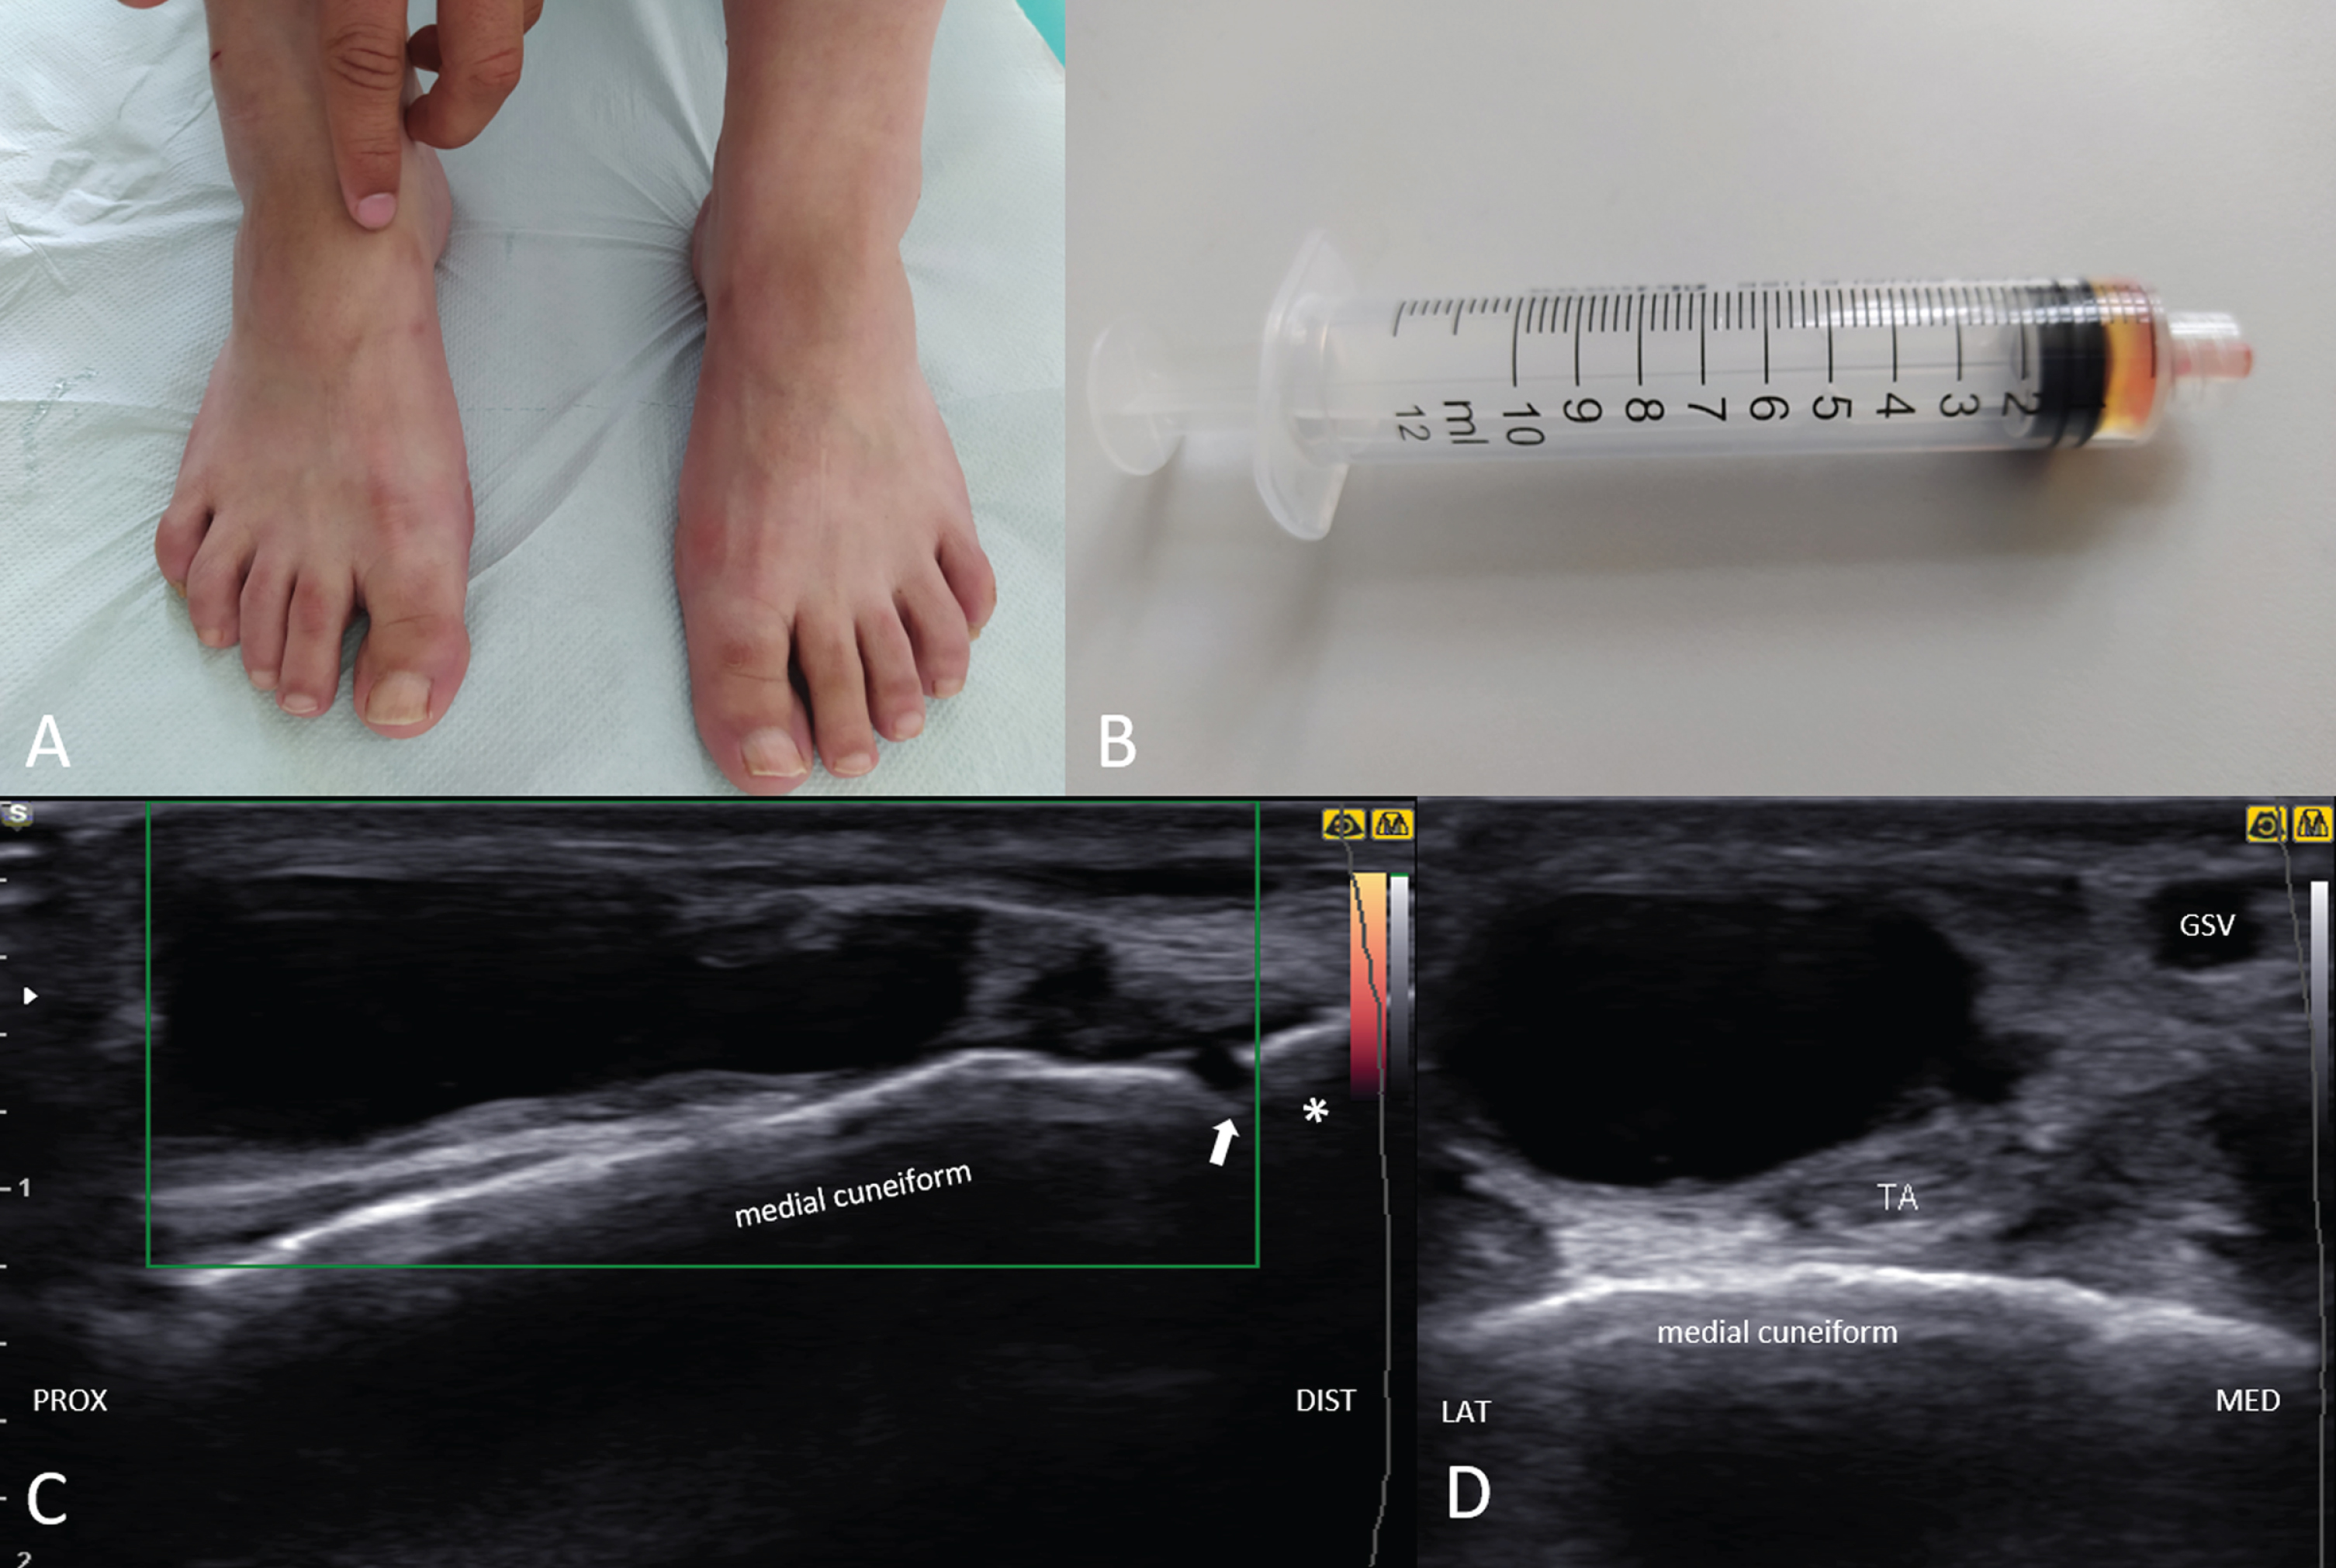 The physician’s finger indicates a mass on the patient’s right foot (dorsomedial aspect) (A). The syringe contains 1 mL of gelatinous and yellowish fluid aspirated from the ganglion (B). Ultrasonography (long-axis view) shows an irregular, septated, and hypoechoic mass in continuity with the 1st metatarsal-cuneiform joint with no hypervascularisation under power Doppler imaging (C). Adjacent tibialis anterior tendon (TA) is seen in the short axis-view (D). Asterisk; 1st metatarsal bone; arrow; 1st metatarsal-cuneiform joint, GSV; greater saphenous vein.